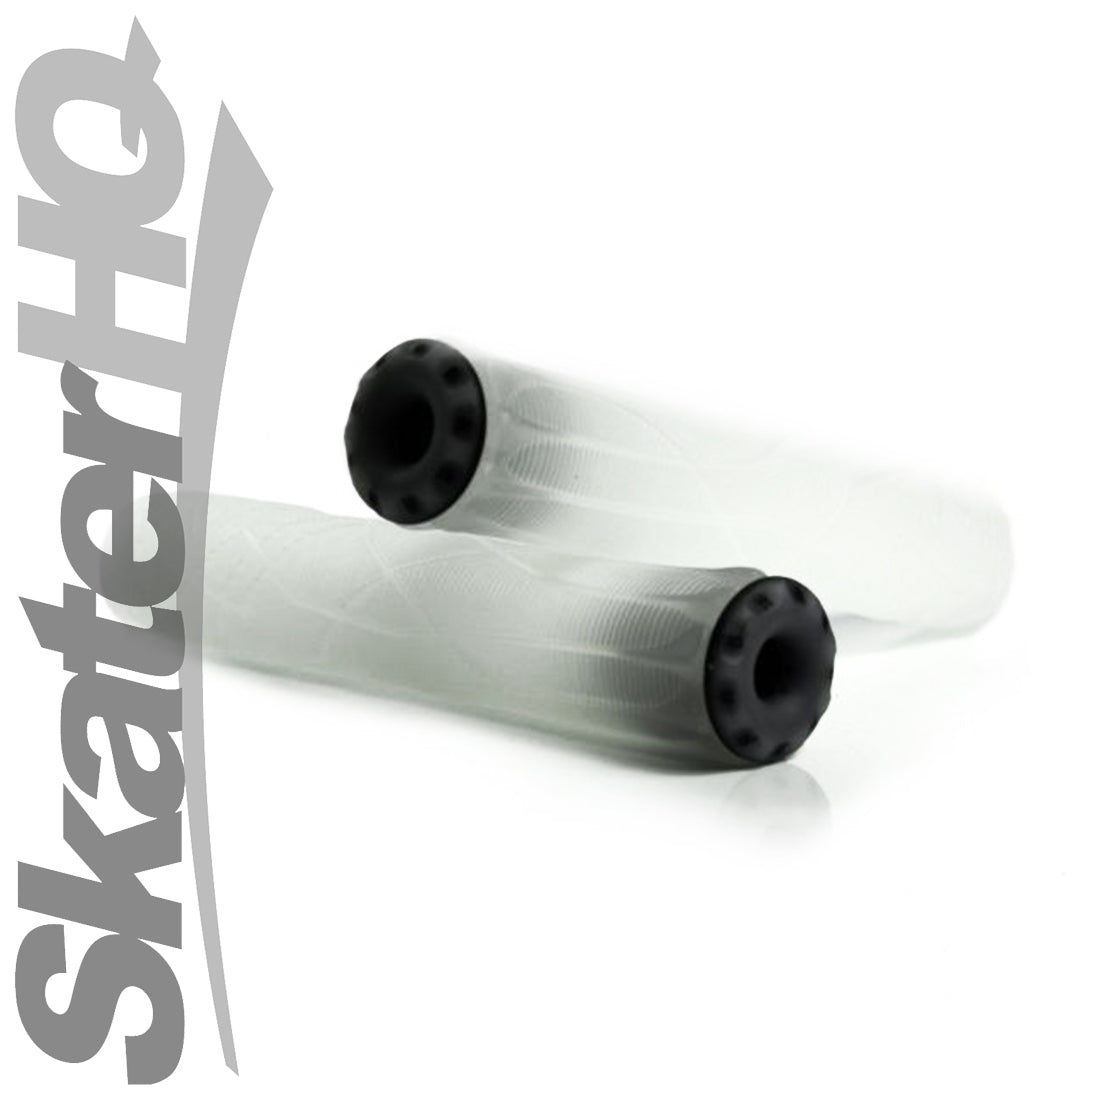 Ethic DTC Handle Grips - Clear Scooter Grips